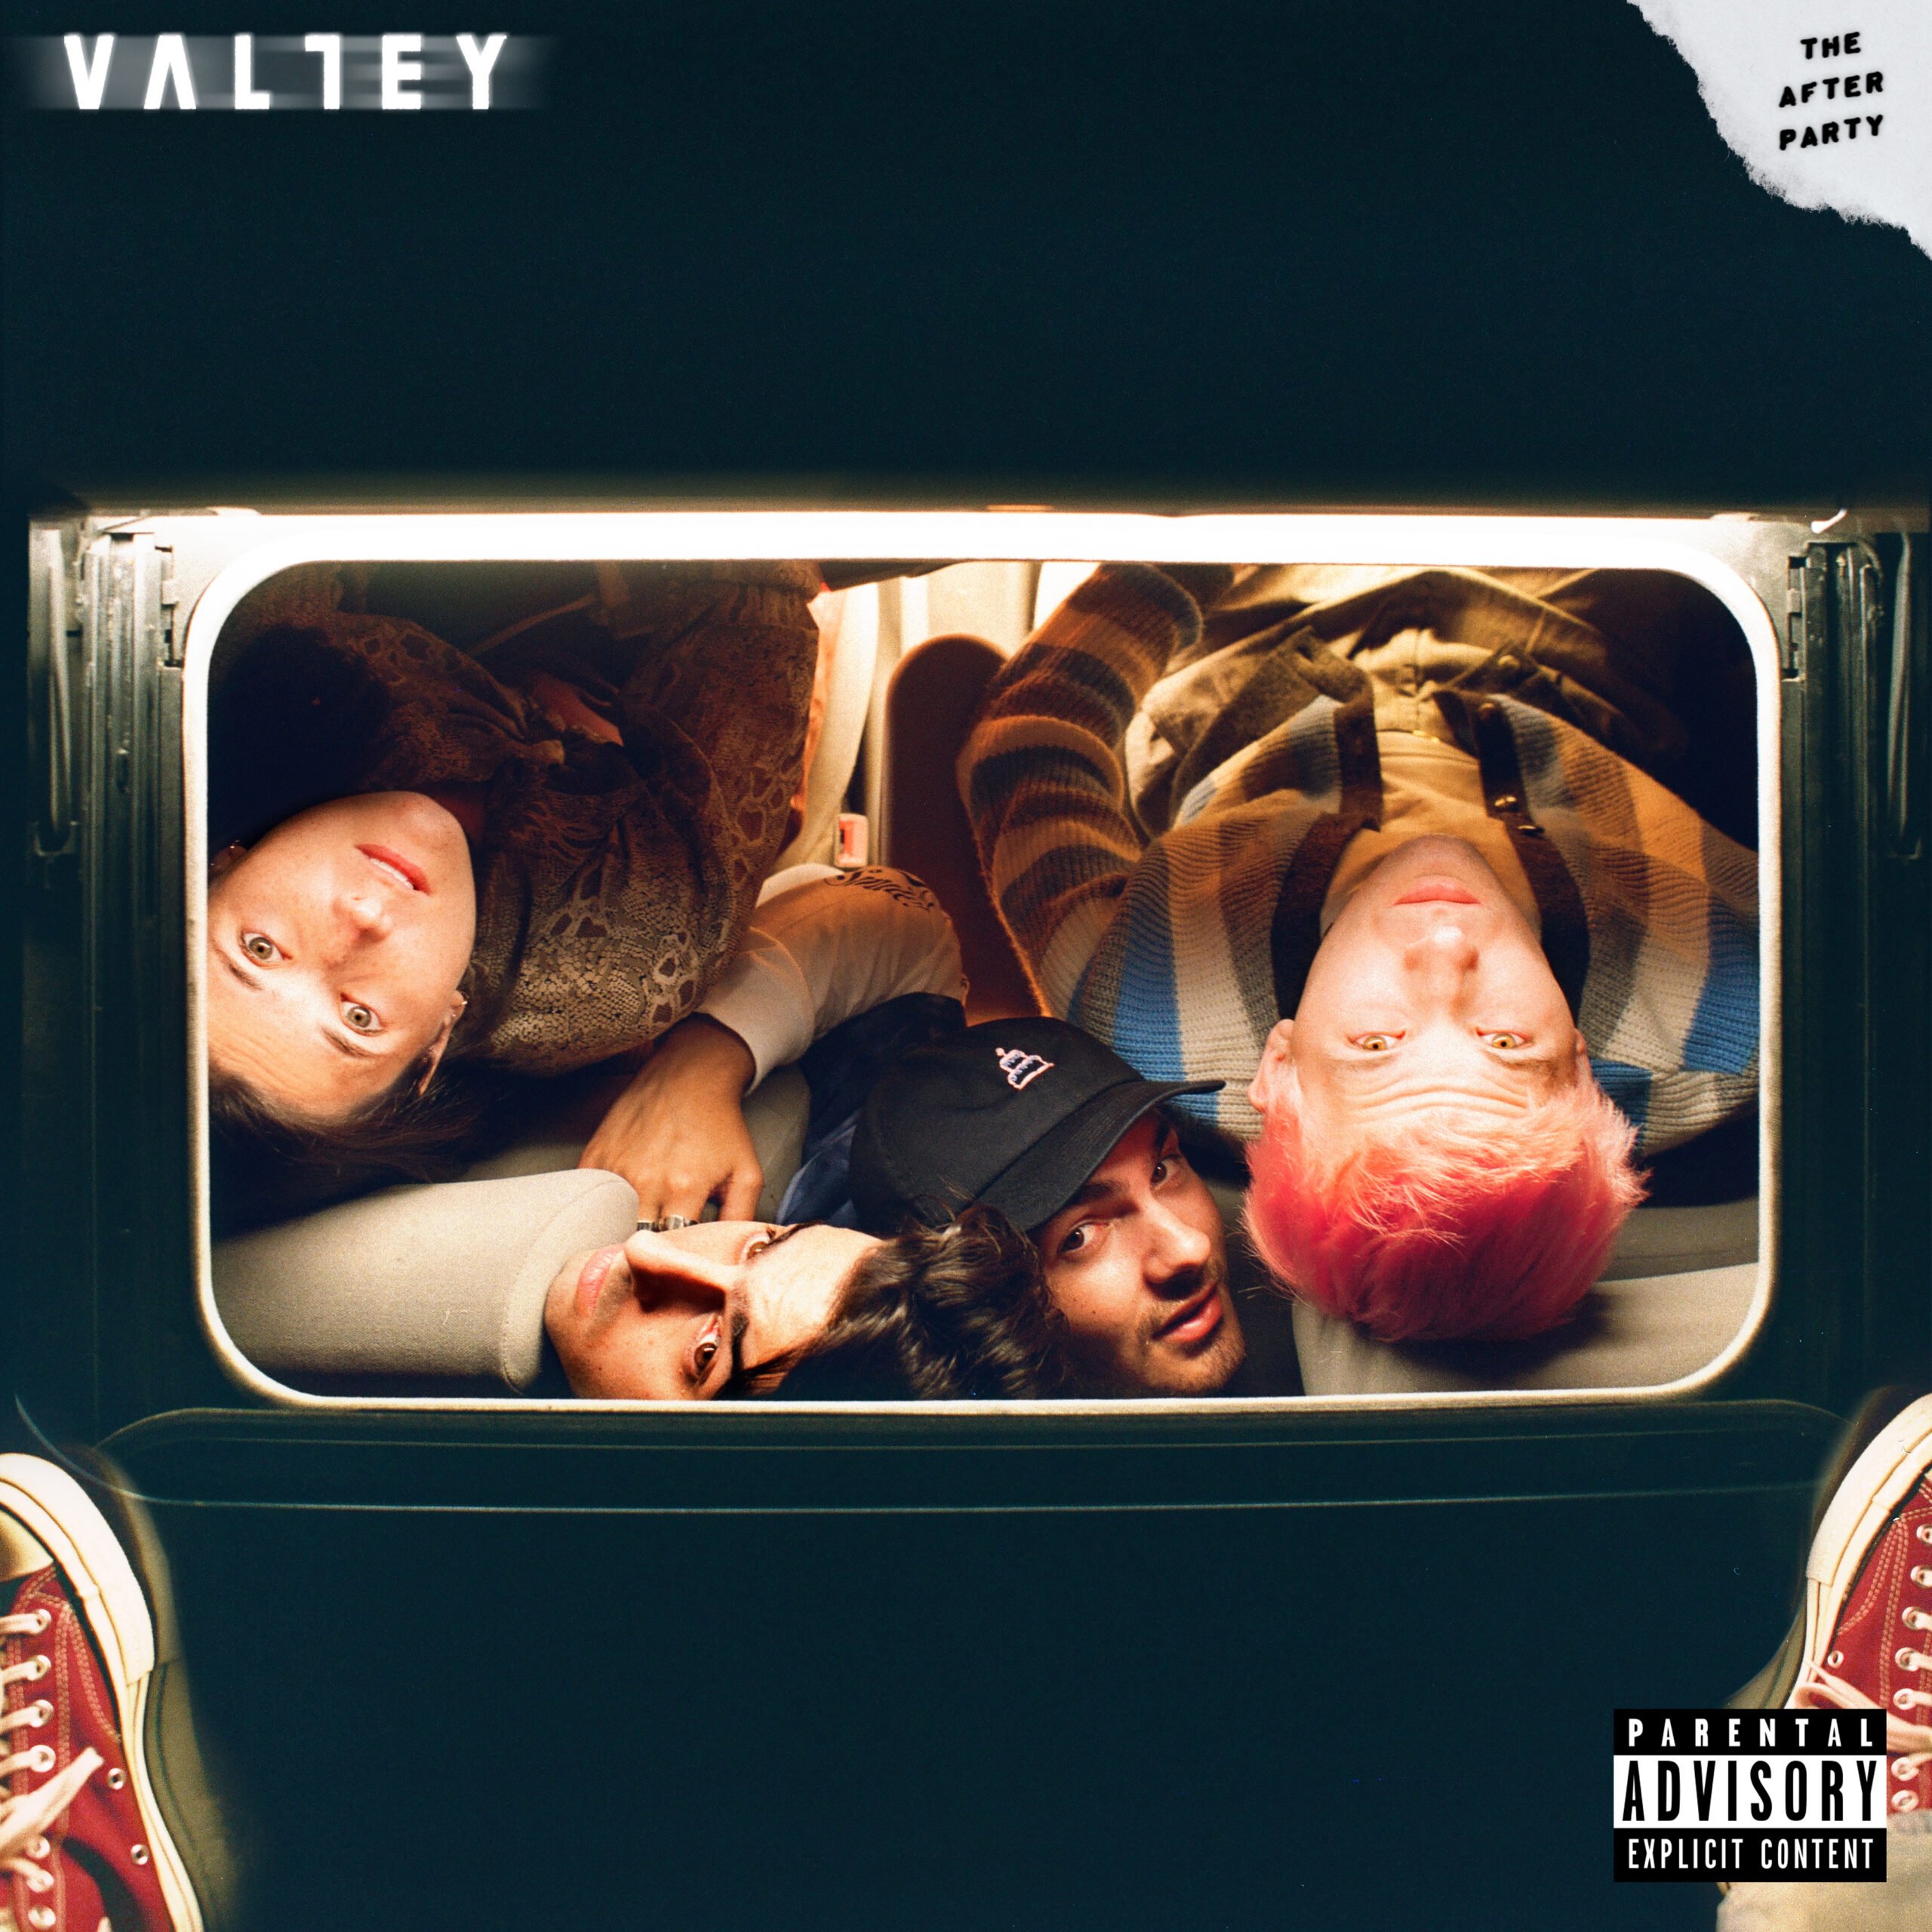 Valley Last Birthday The After Party EP Art via Capitol Music Group for use by 360 Magazine